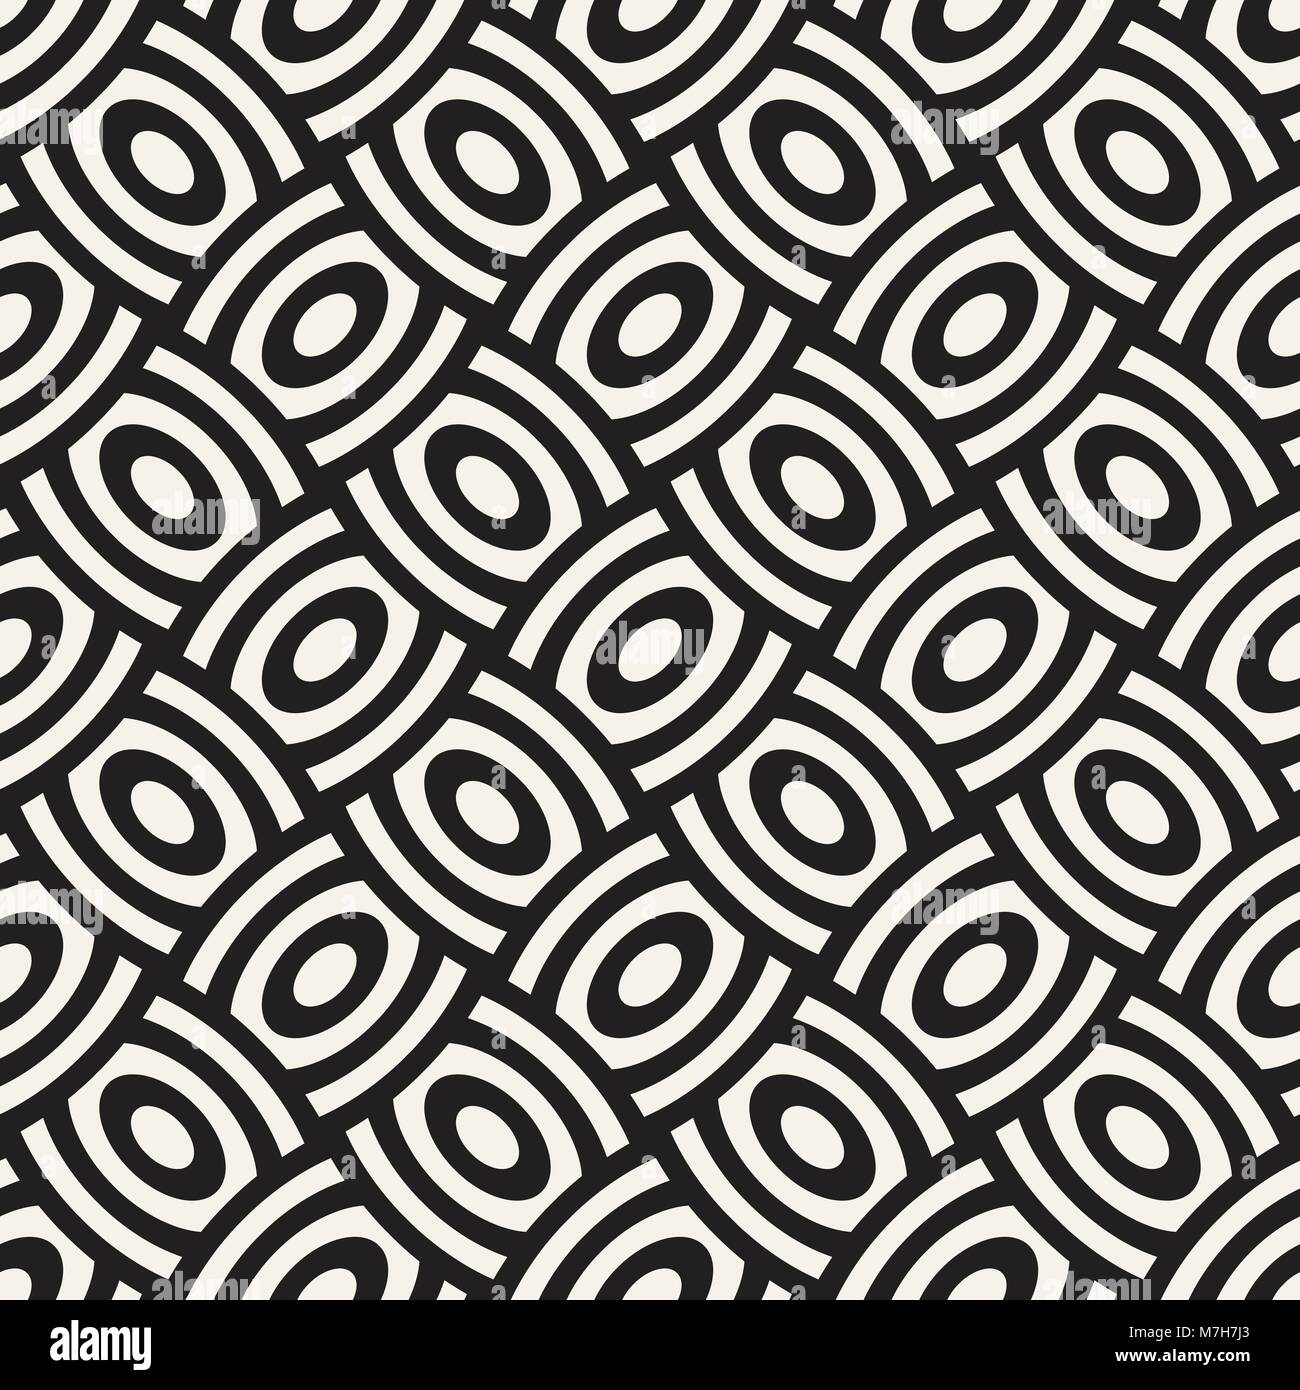 https://c8.alamy.com/comp/M7H7J3/vector-geometric-seamless-pattern-with-curved-shapes-grid-abstract-M7H7J3.jpg